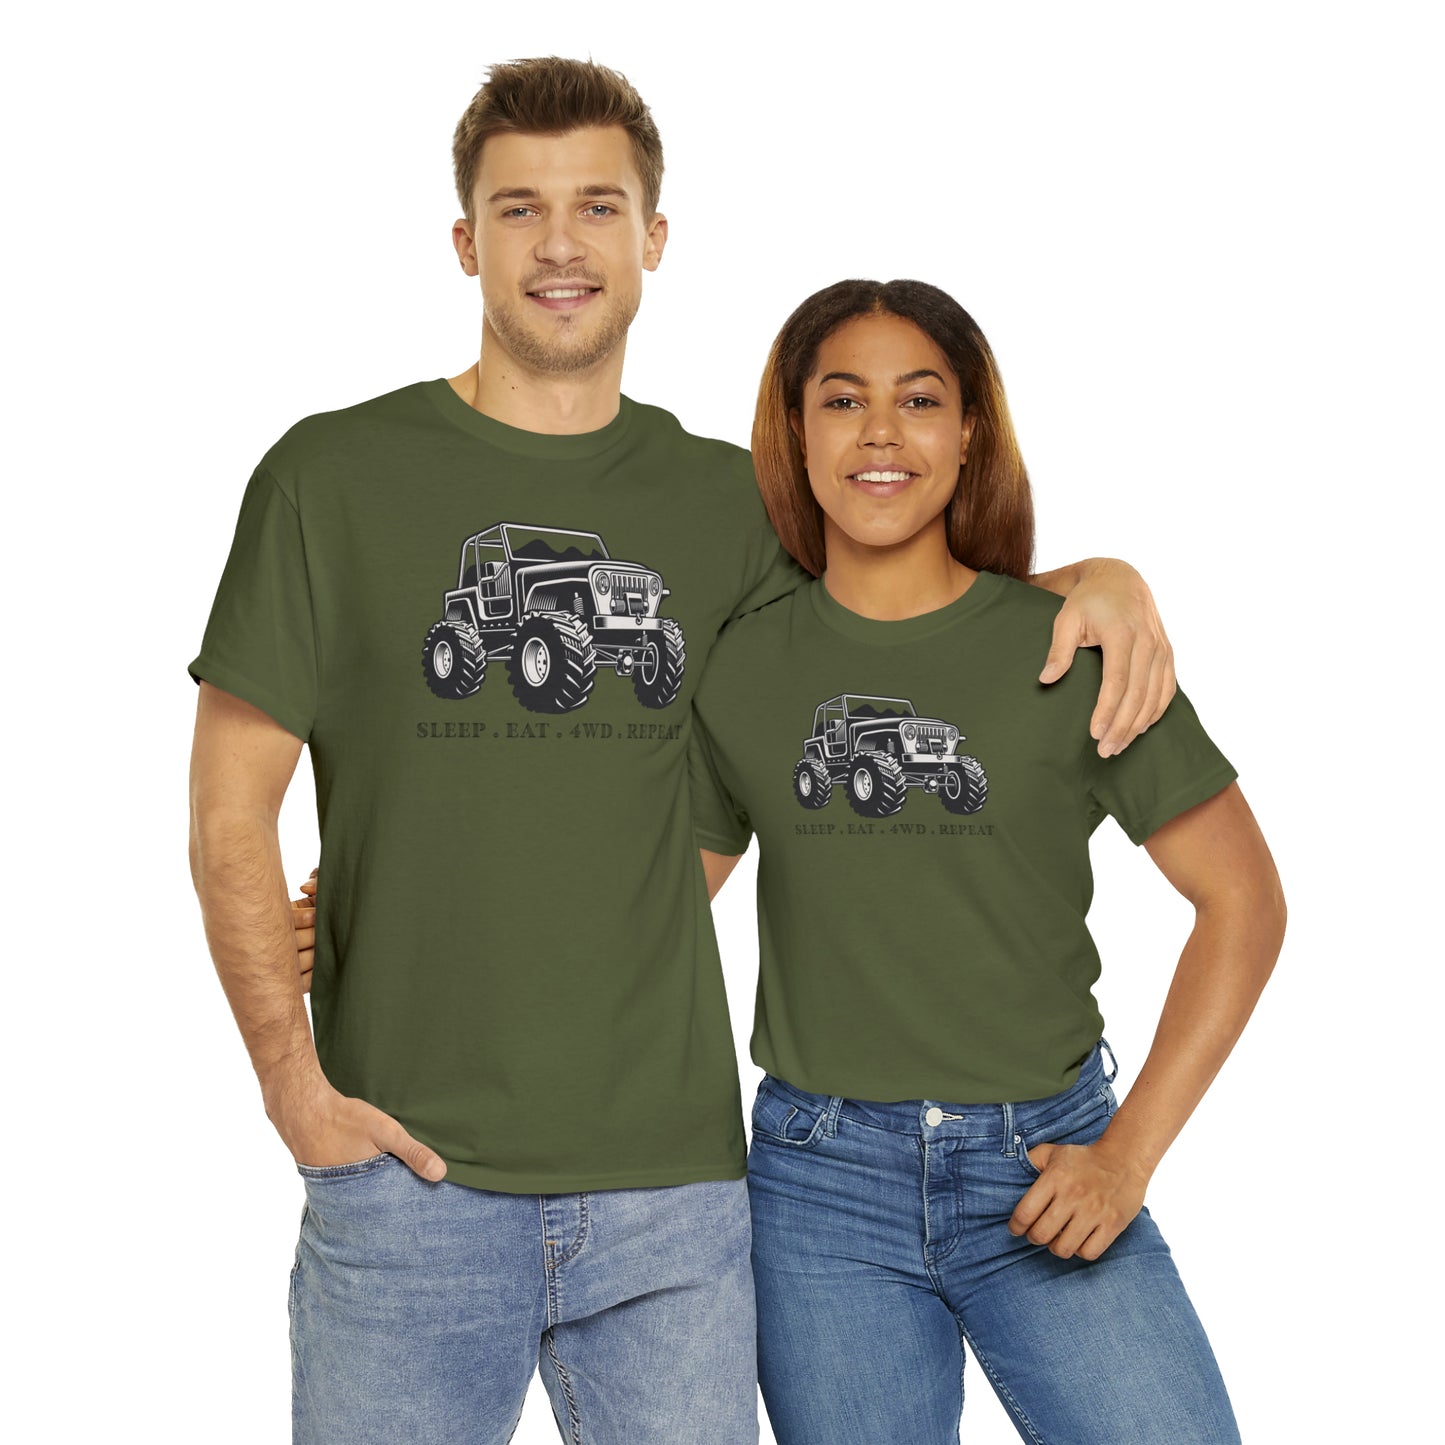 4WD Drive T-Shirt For Exploration TShirt For Adventure T Shirt For 4WD Enthusiast Shirt For 4WD Club Shirt